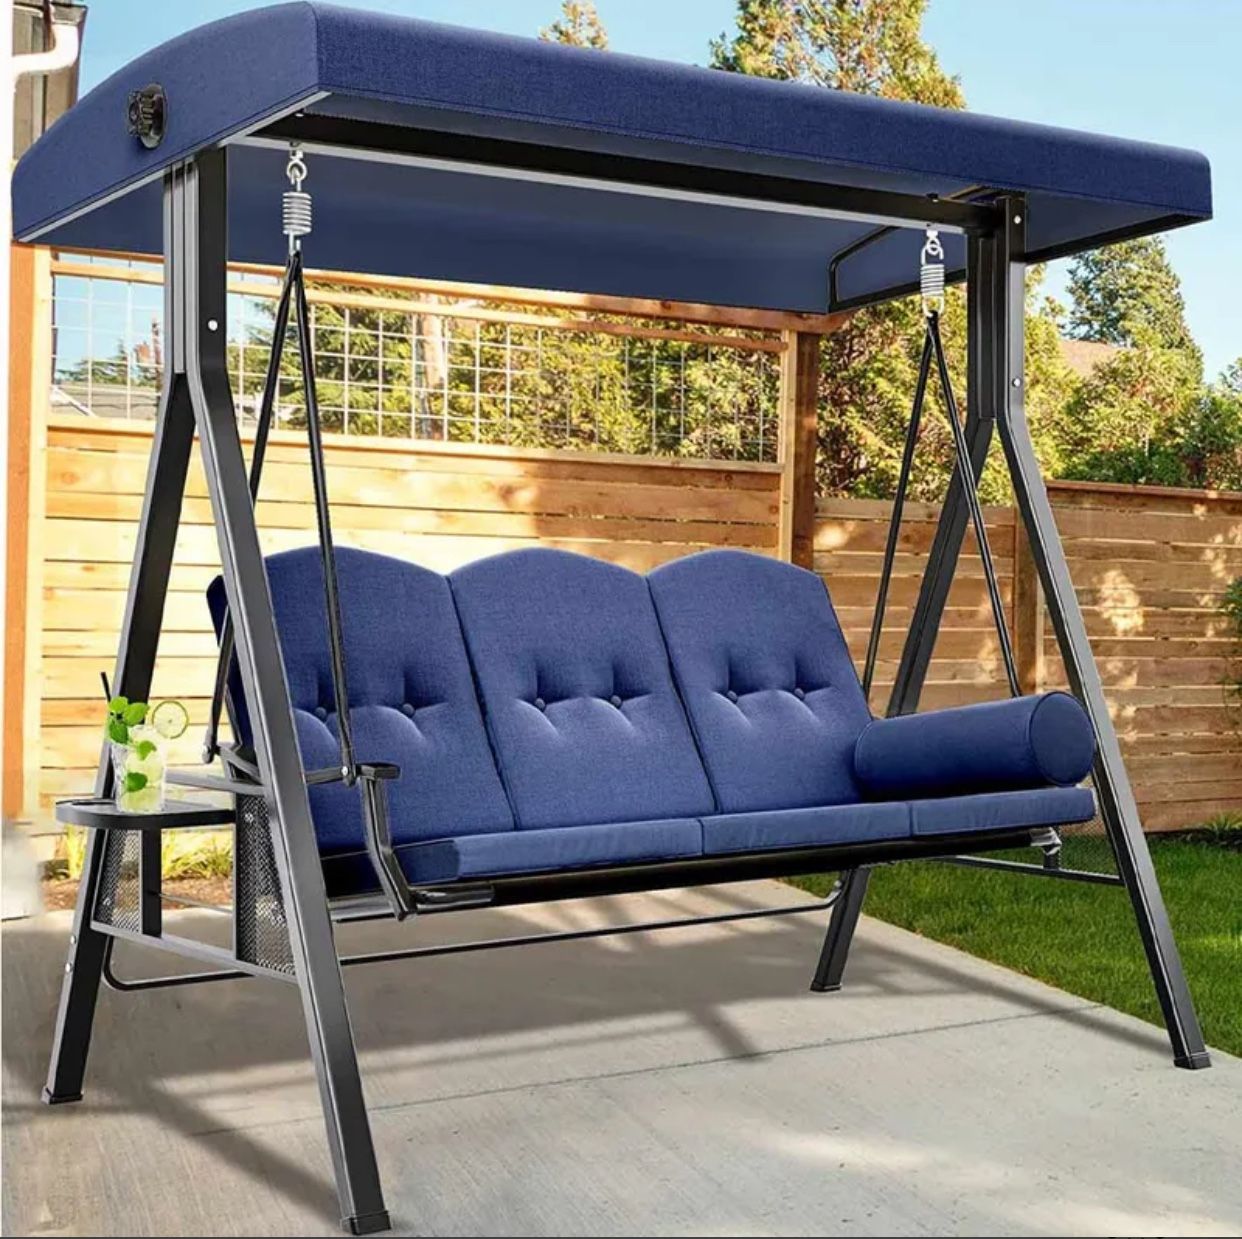 New In Box 3-Person Deluxe Outdoor Large Porch Swing with Adjustable Canopy in Navy Blue Buy Now